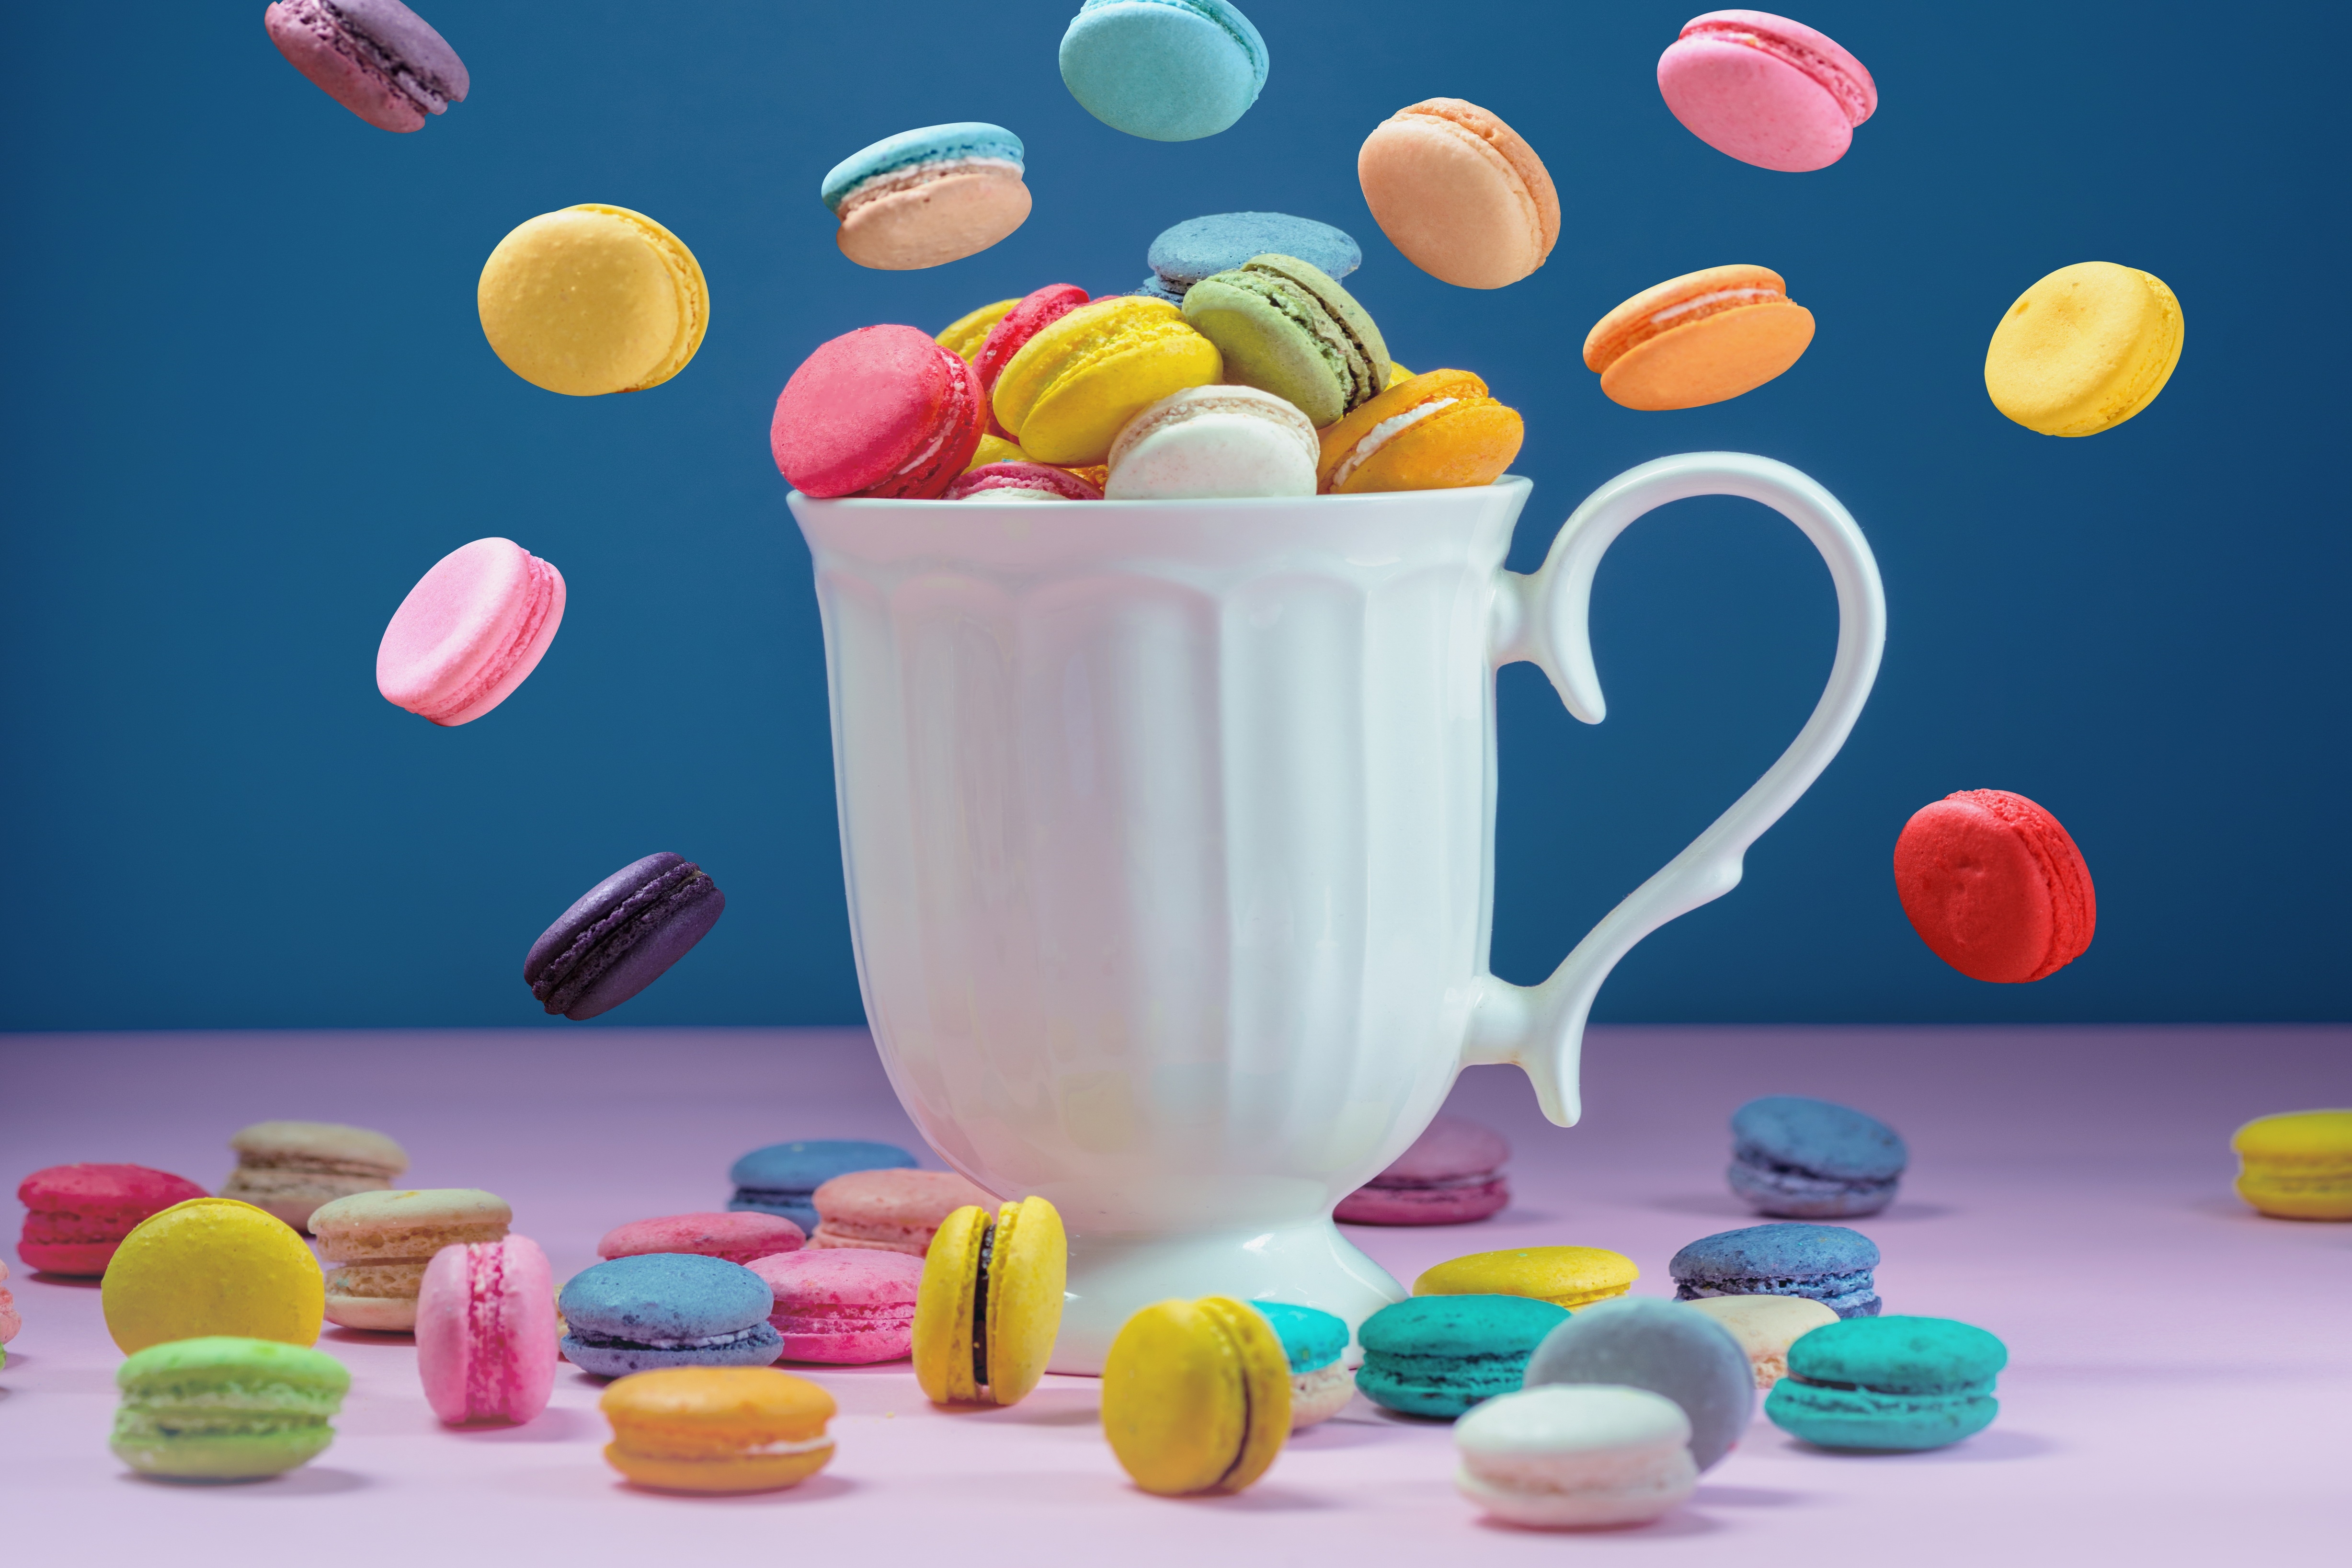 Wallpapers pastry sweets wallpaper macaron cup on the desktop